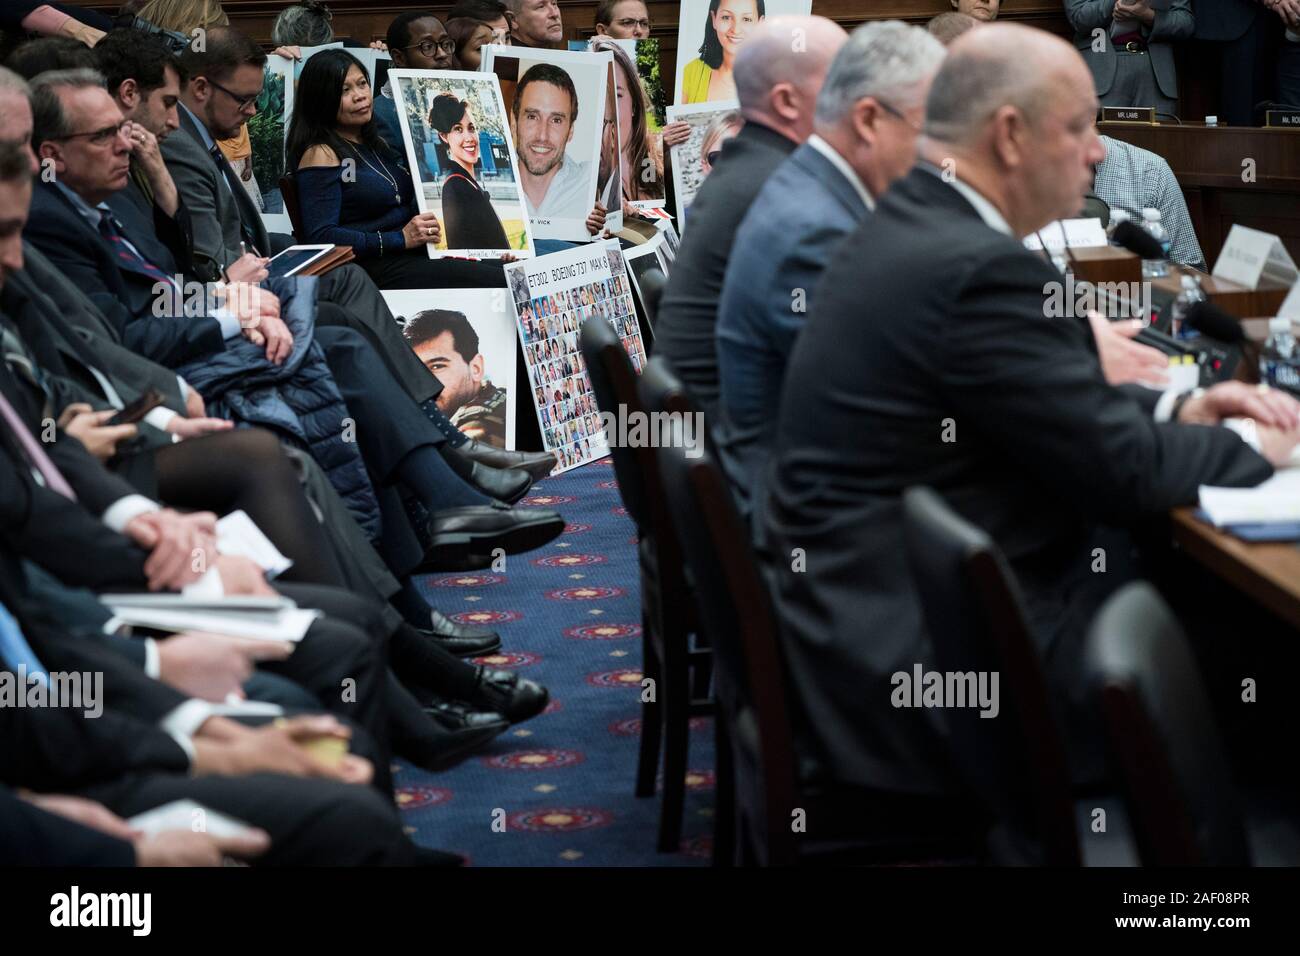 (191211) -- WASHINGTON, Dec. 11, 2019 (Xinhua) -- People hold photos of Boeing 737 plane crash victims as Stephen Dickson, chief of the Federal Aviation Administration (FAA), testifies before the House Committee on Transportation and Infrastructure during a hearing on 'The Boeing 737 MAX: Examining the Federal Aviation Administration's Oversight of the Aircraft's Certification' in Washington, DC, the United States, on Dec. 11, 2019. Steve Dickson said Wednesday that aviation regulators won't likely clear Boeing's troubled 737 Max airplanes for flight until 2020. (Photo by Sarah Silbiger/Xinhu Stock Photo